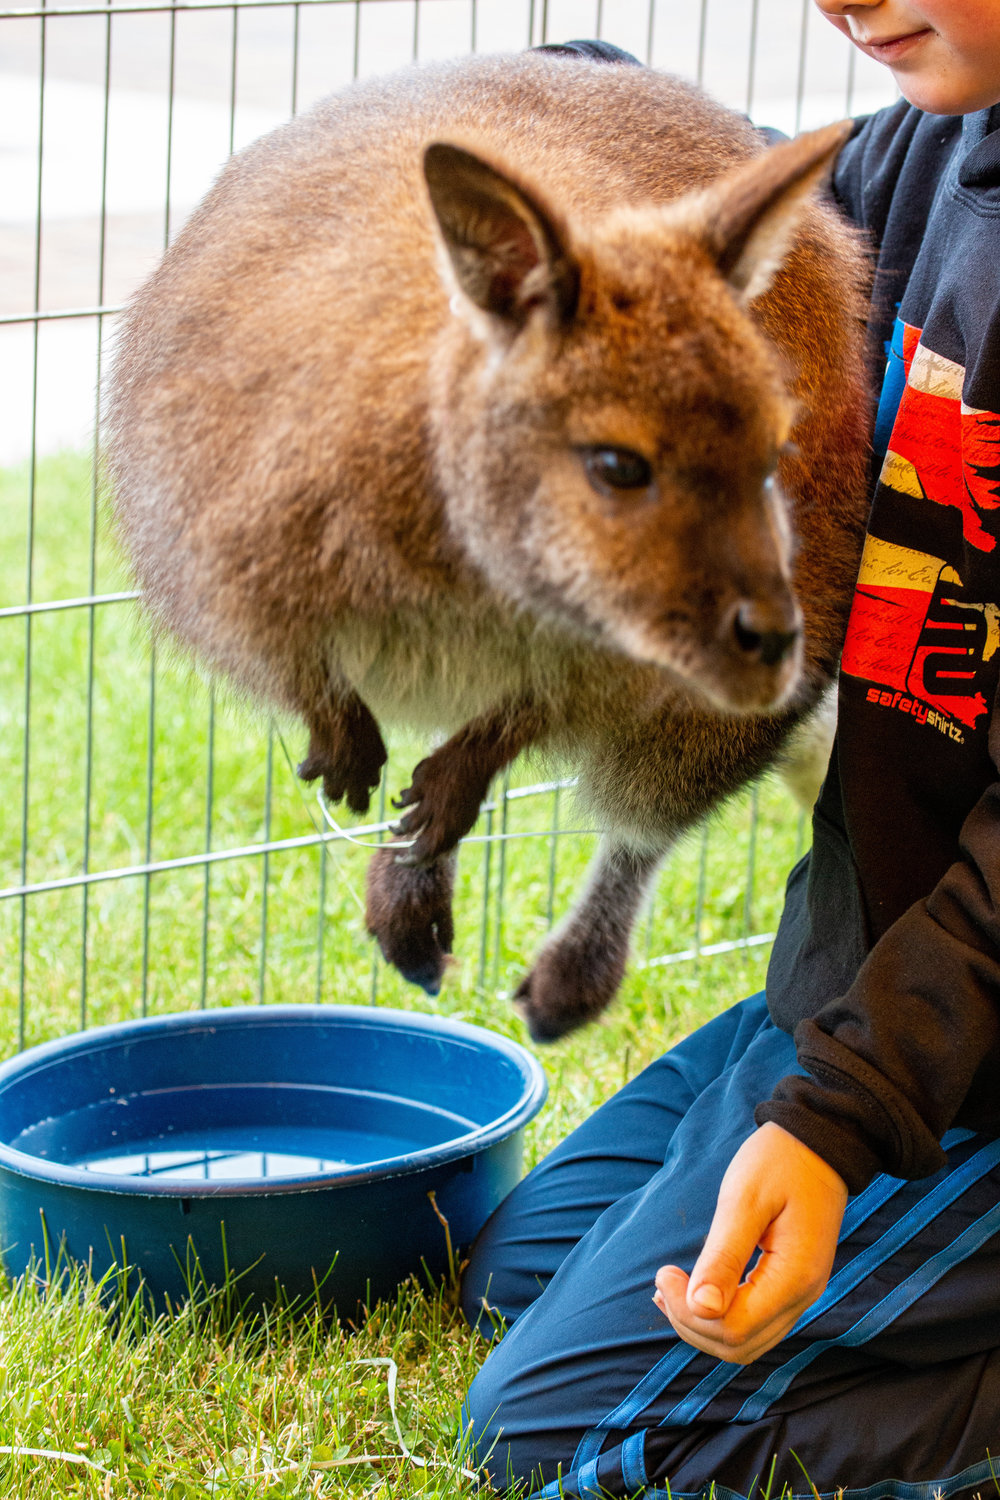 This wallaby makes a swift jump over a young boy, probably needing a break from all the attention due to being so popular, at the petting zoo at the Centralia College SpringFest Tuesday afternoon.